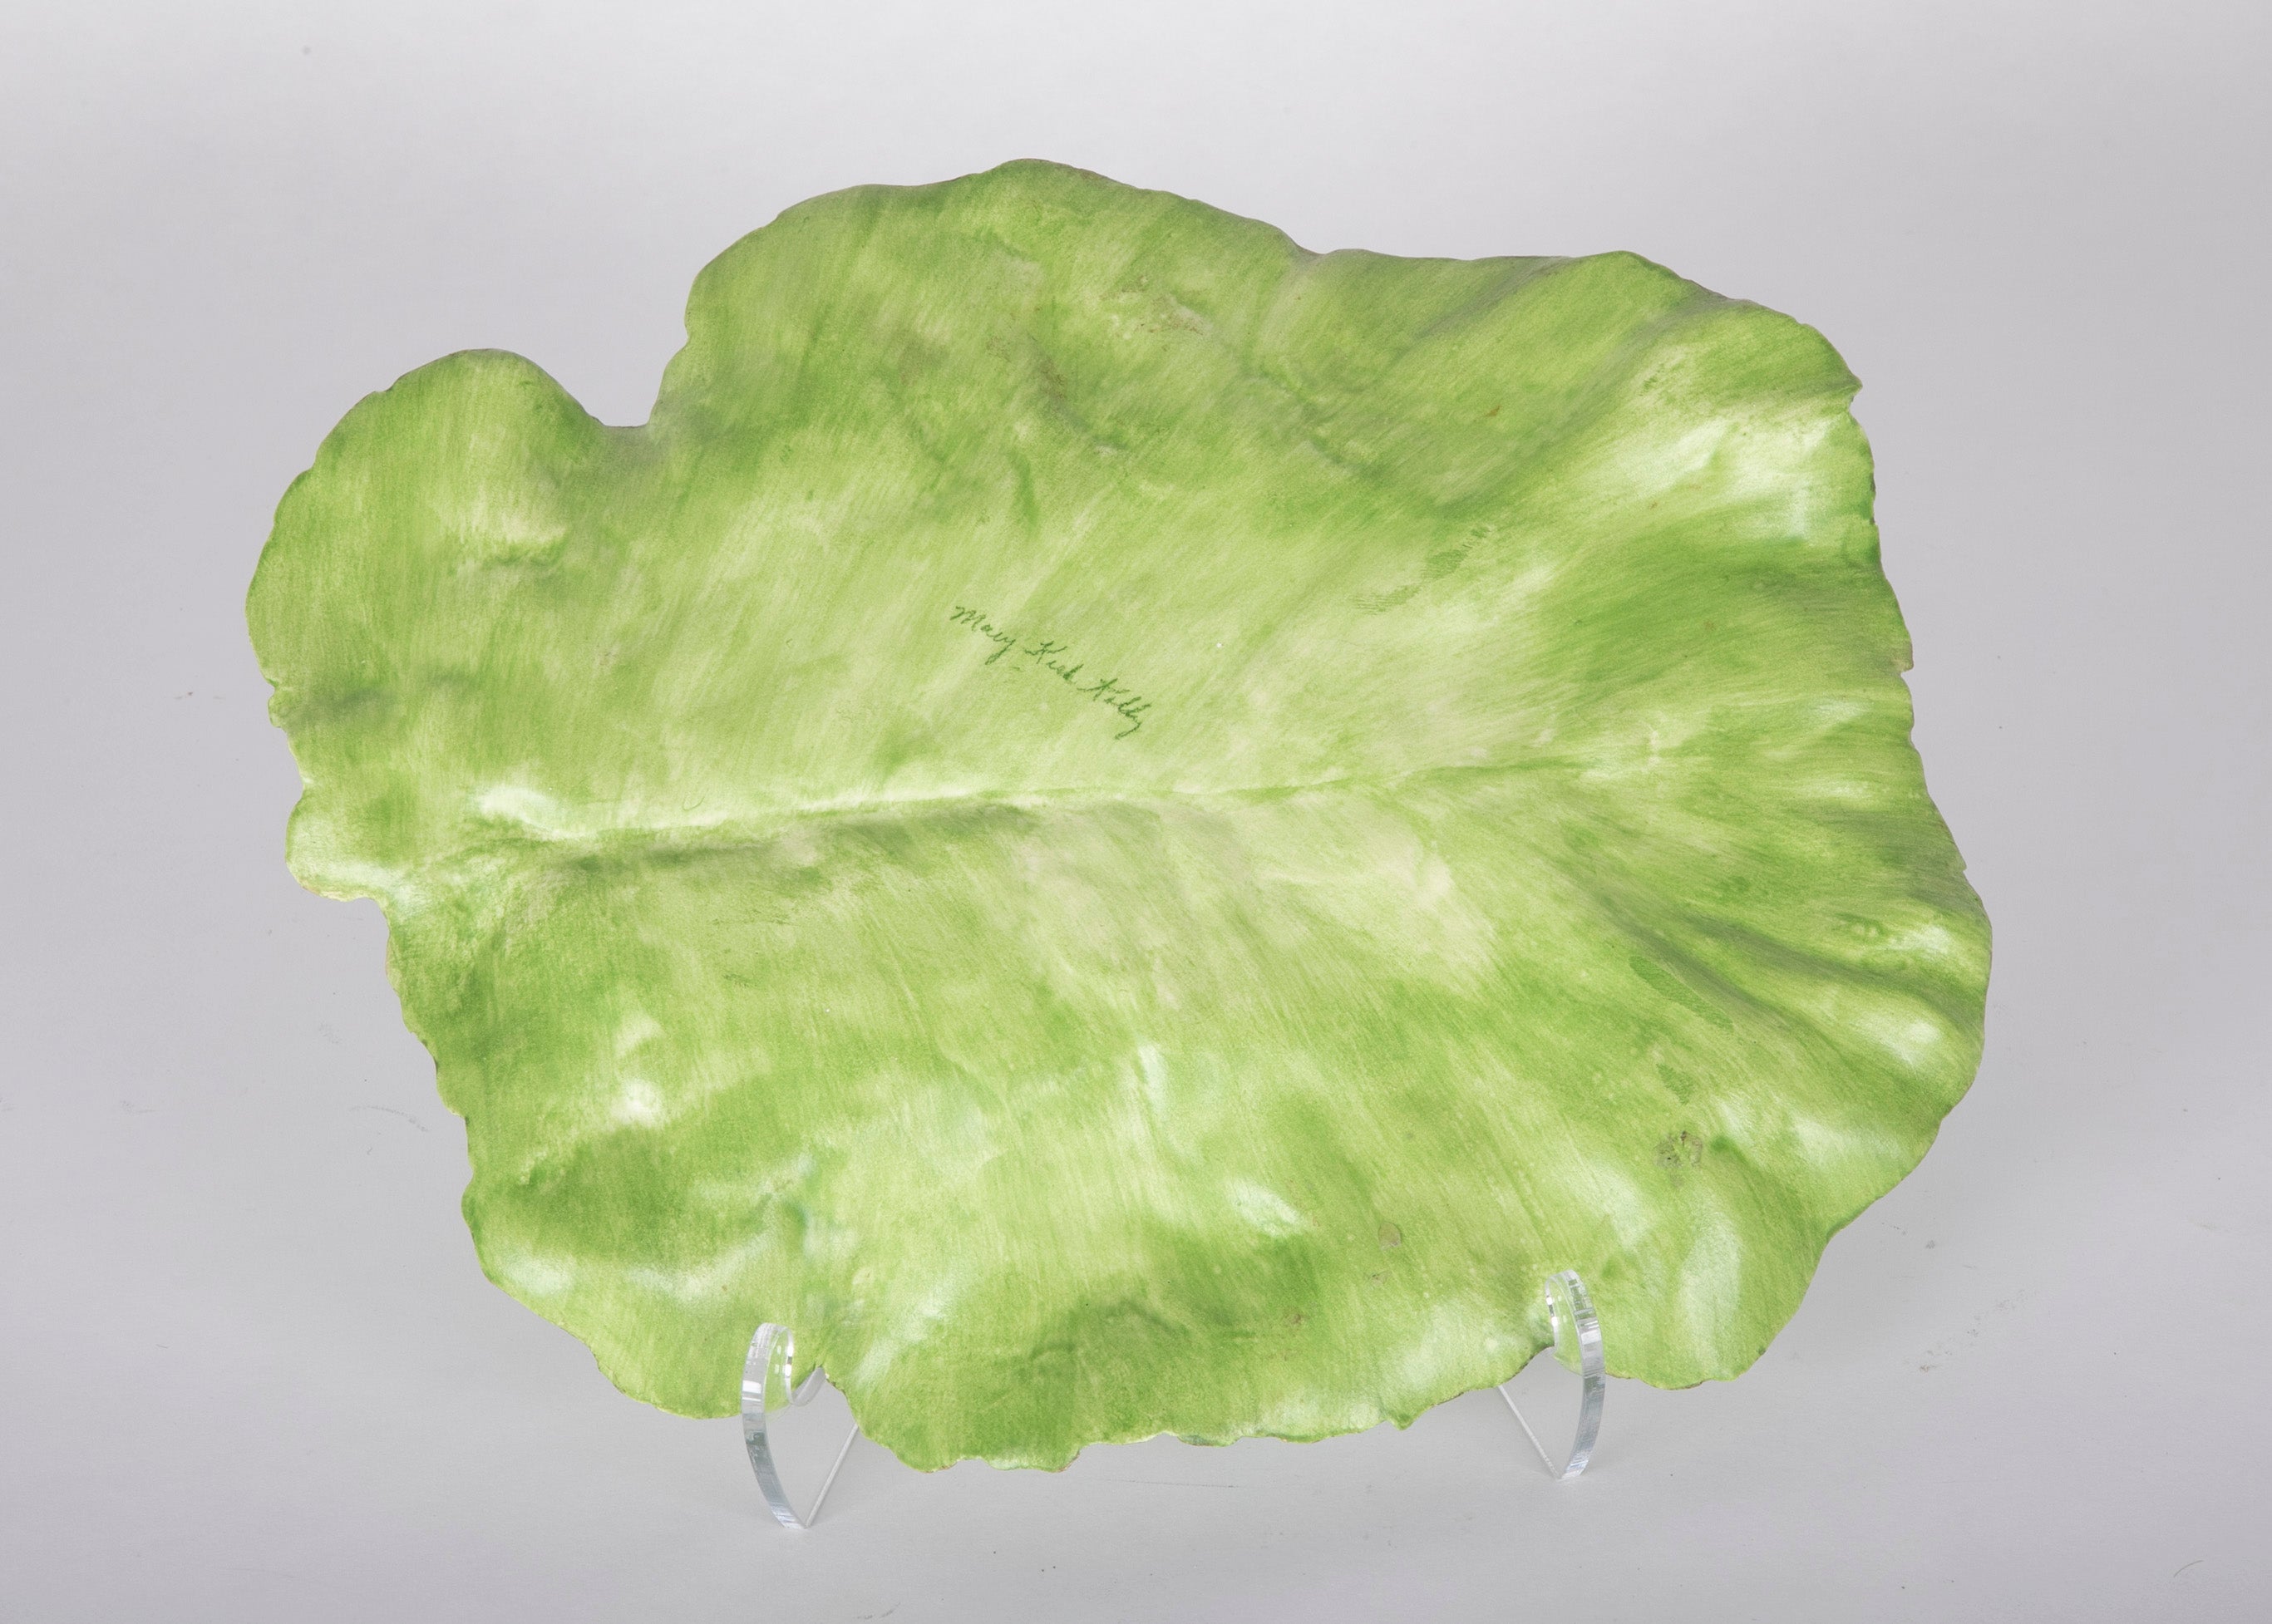 A Mary Kirk Kelly Porcelain Plate in Leaf Form